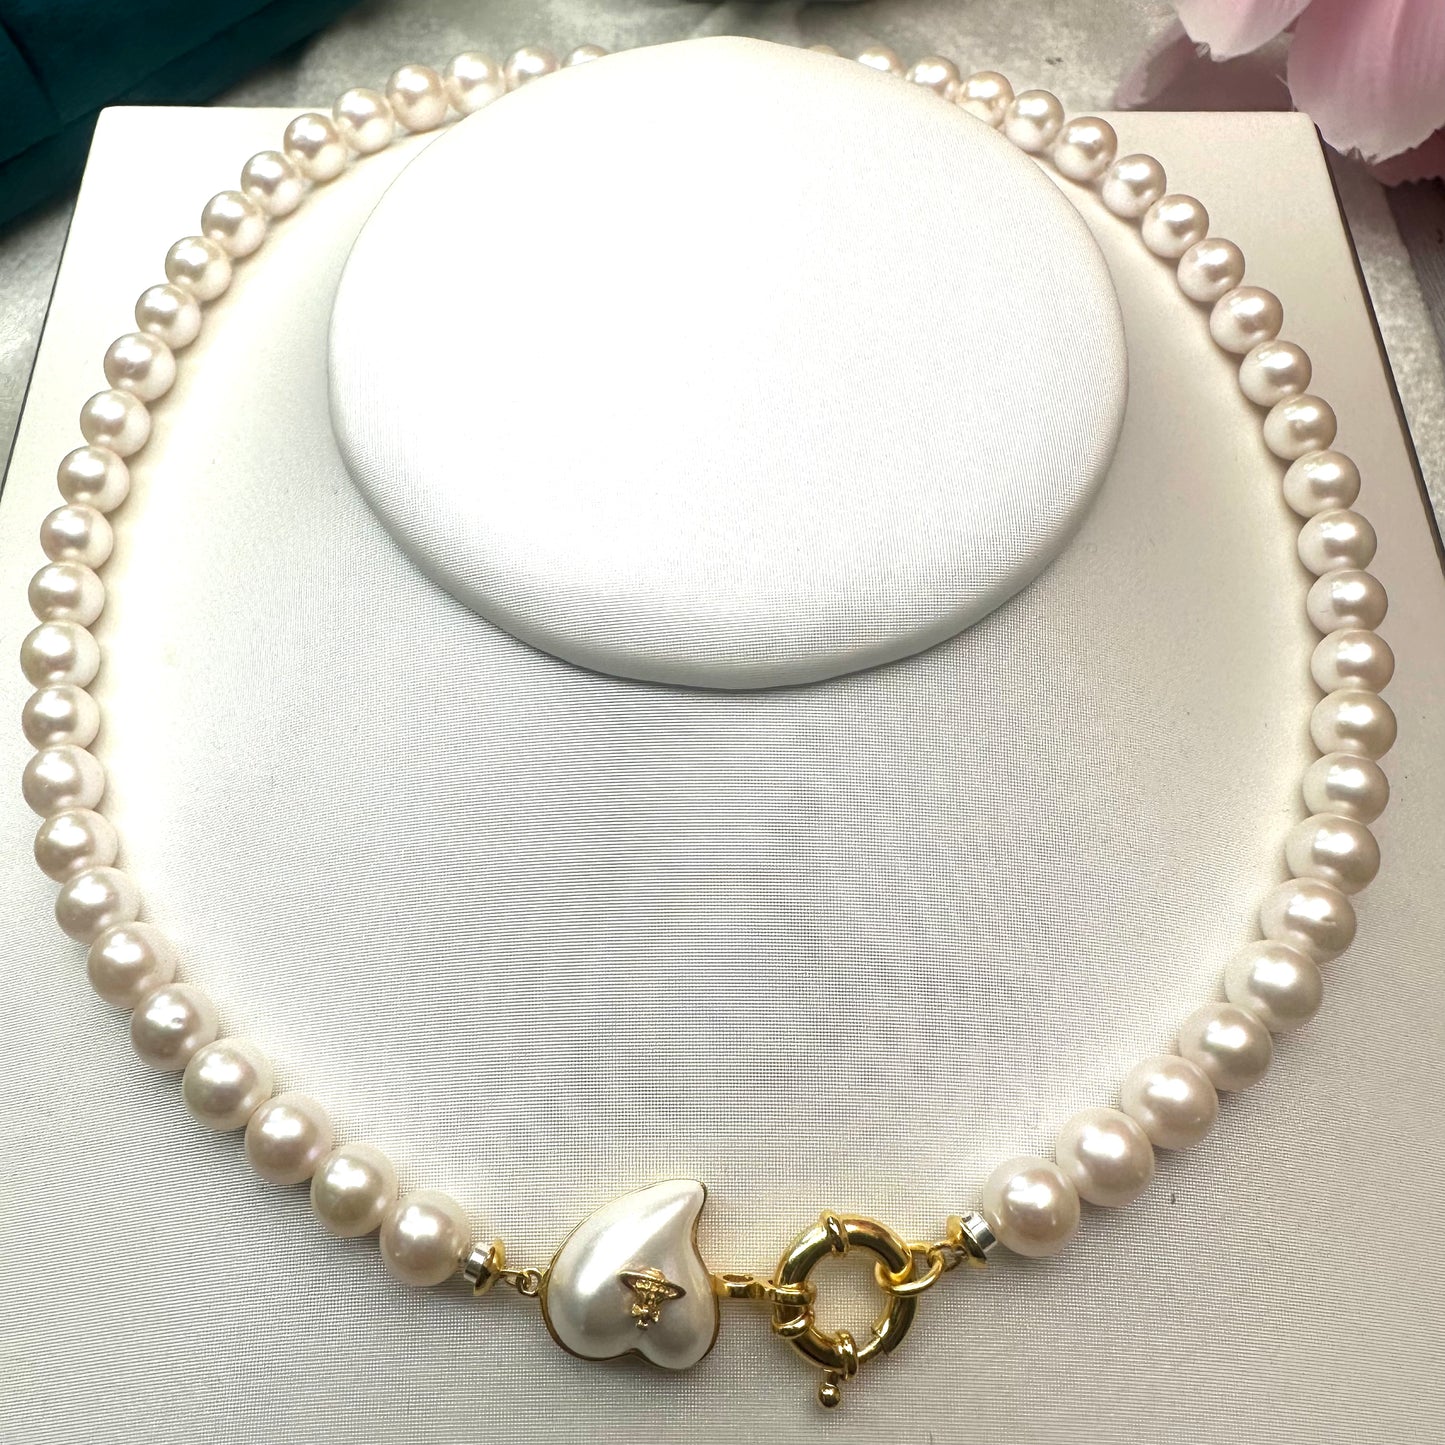 (N13) Pearl necklace (Fashion style) $170